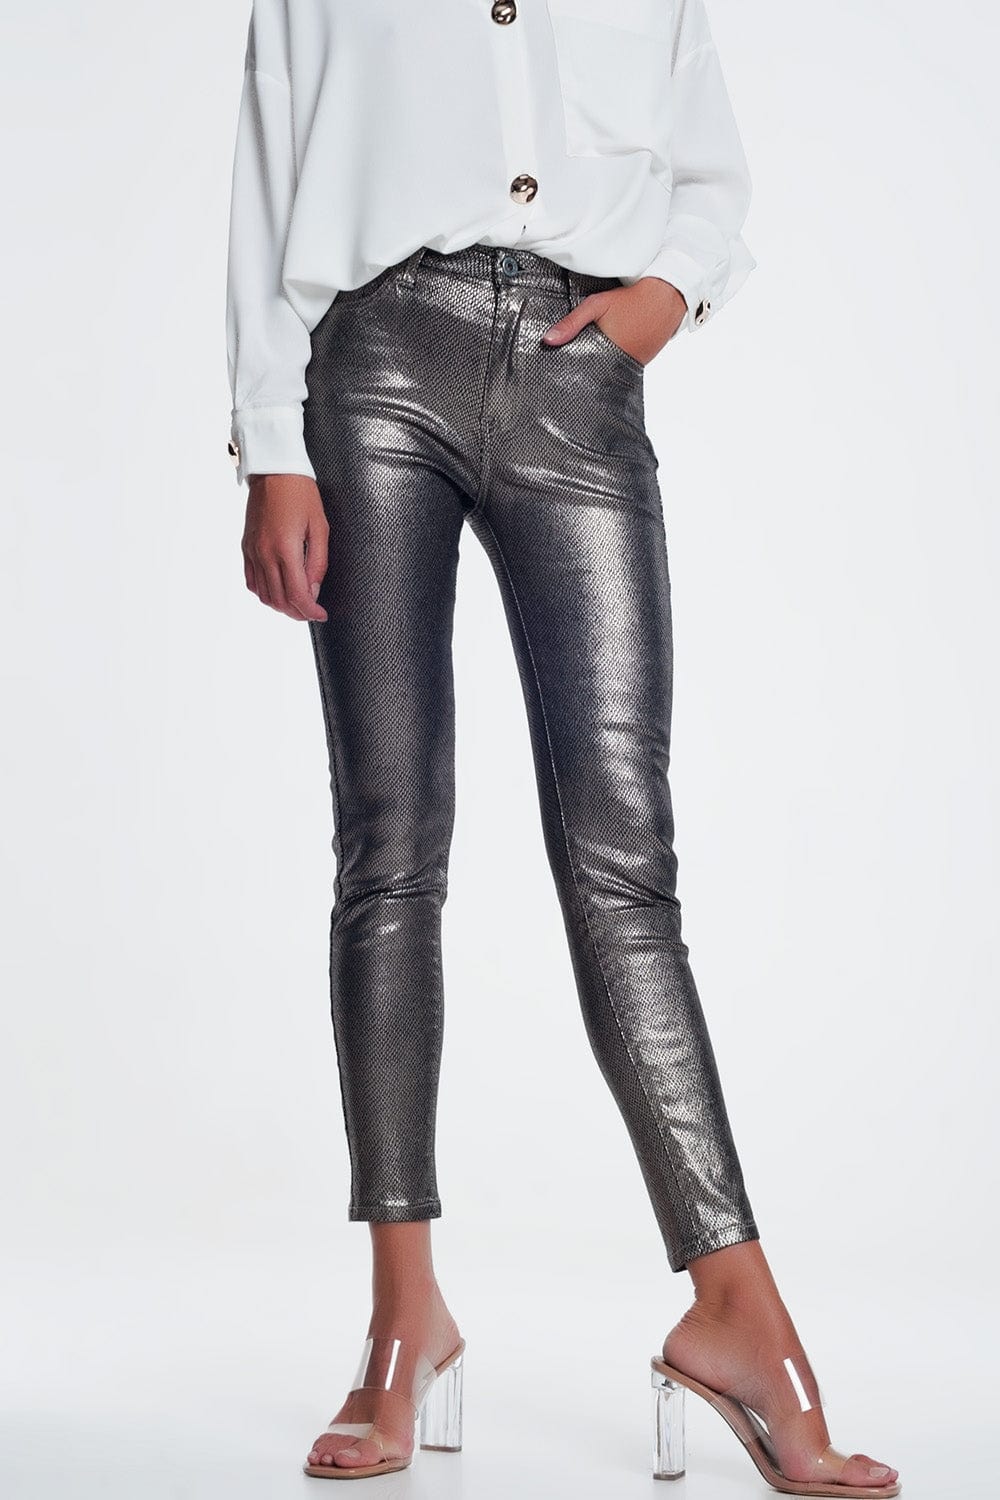 Q2 Women's Pants & Trousers Silver Trousers with Snake Print